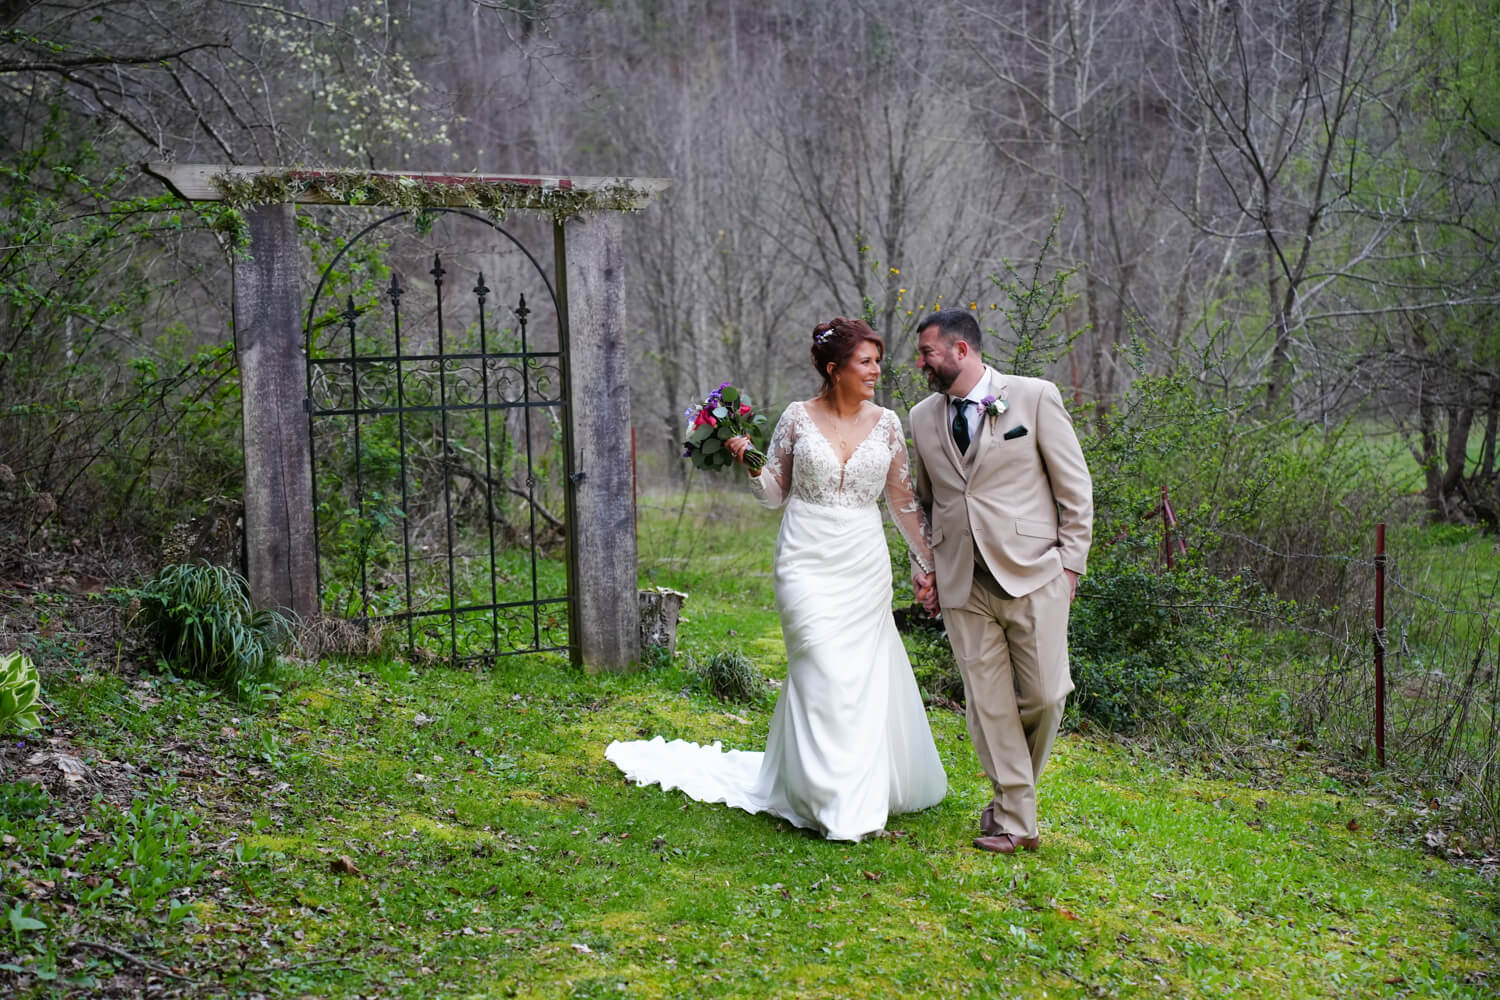 Bride and groom walking together and laughing near an iron gate in the woods